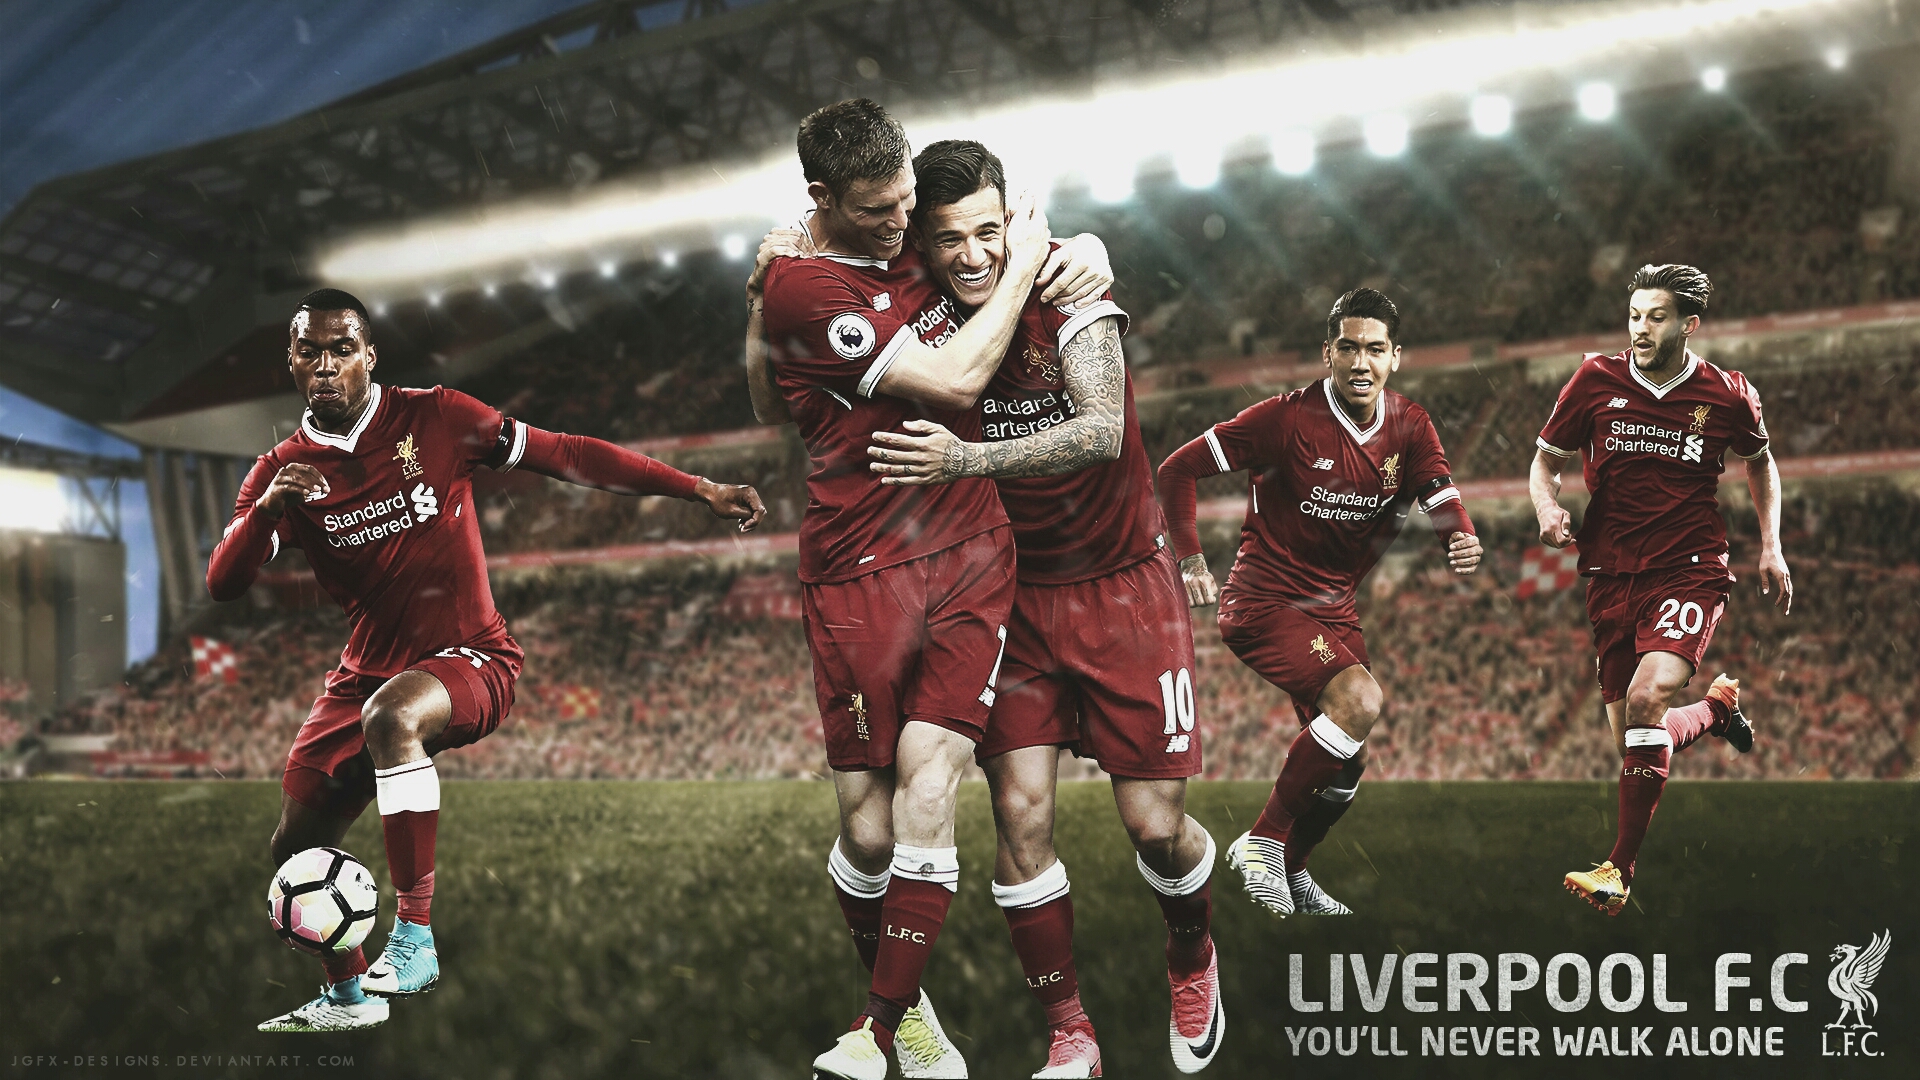 Liverpool Fc Wallpaper By Jgfx Designs On